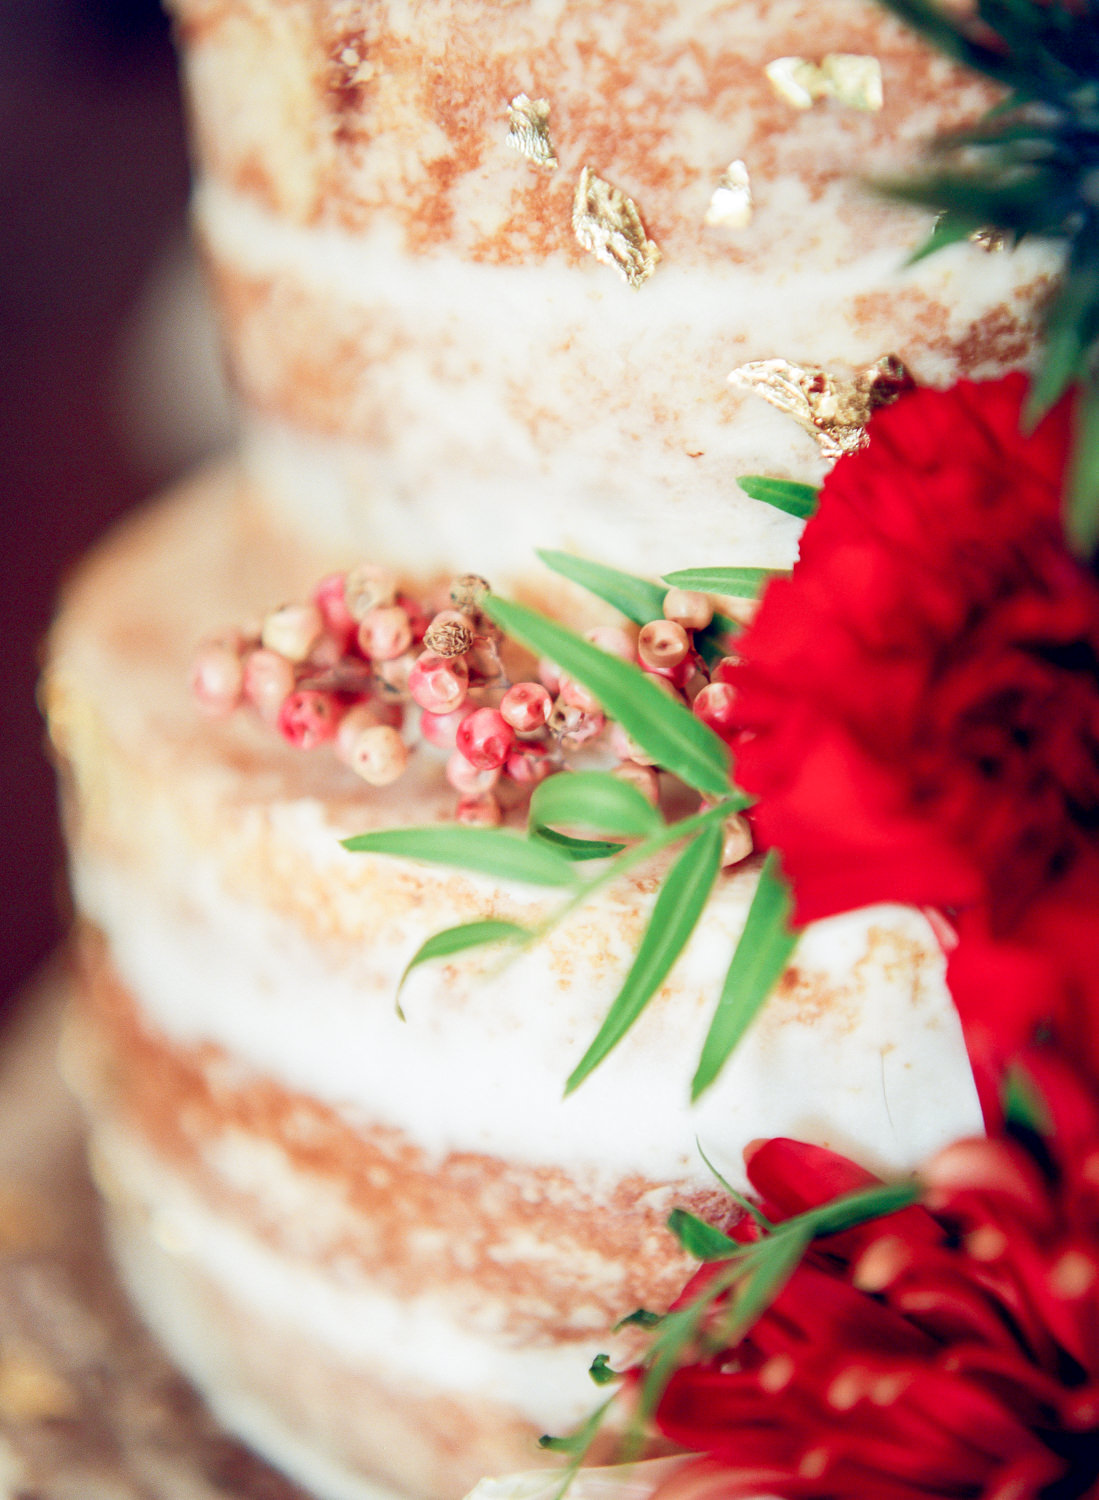 Sweet Design Bakery, naked wedding cake with berry sprigs and red flowers, Erica Robnett Photography